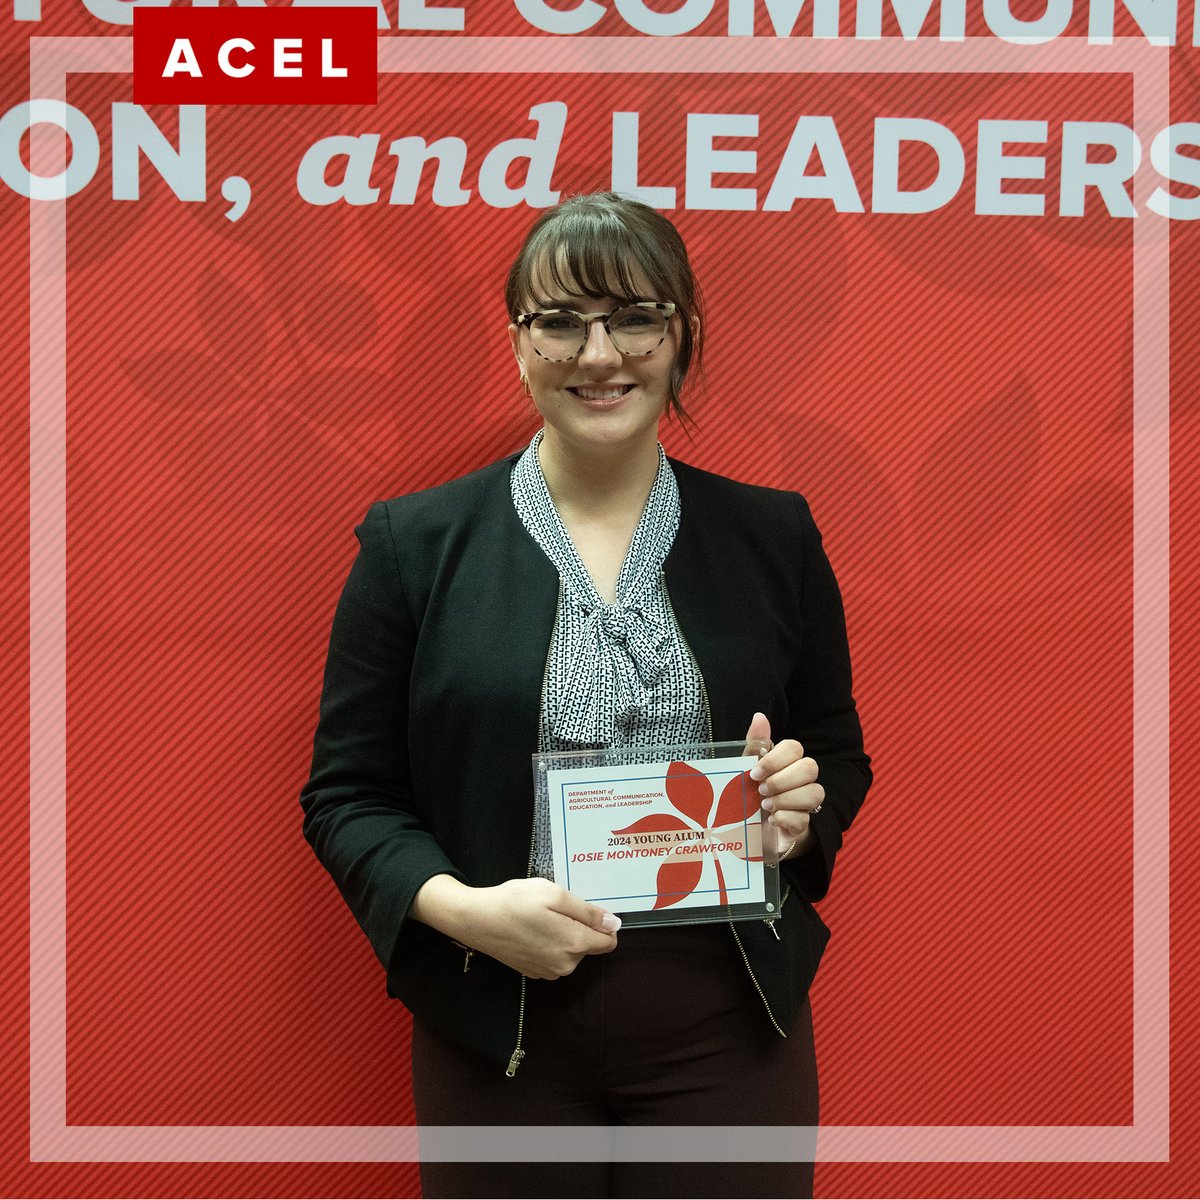 Congratulations to Meghann Winters Rowe '19 and Josie Montoney Crawford '21 for receiving the ACEL Young Alumni award! This award is presented to alumni who have had achievements wrothy of recognition in their young career at our department banquet in mid-April. #BuckeyeForLife